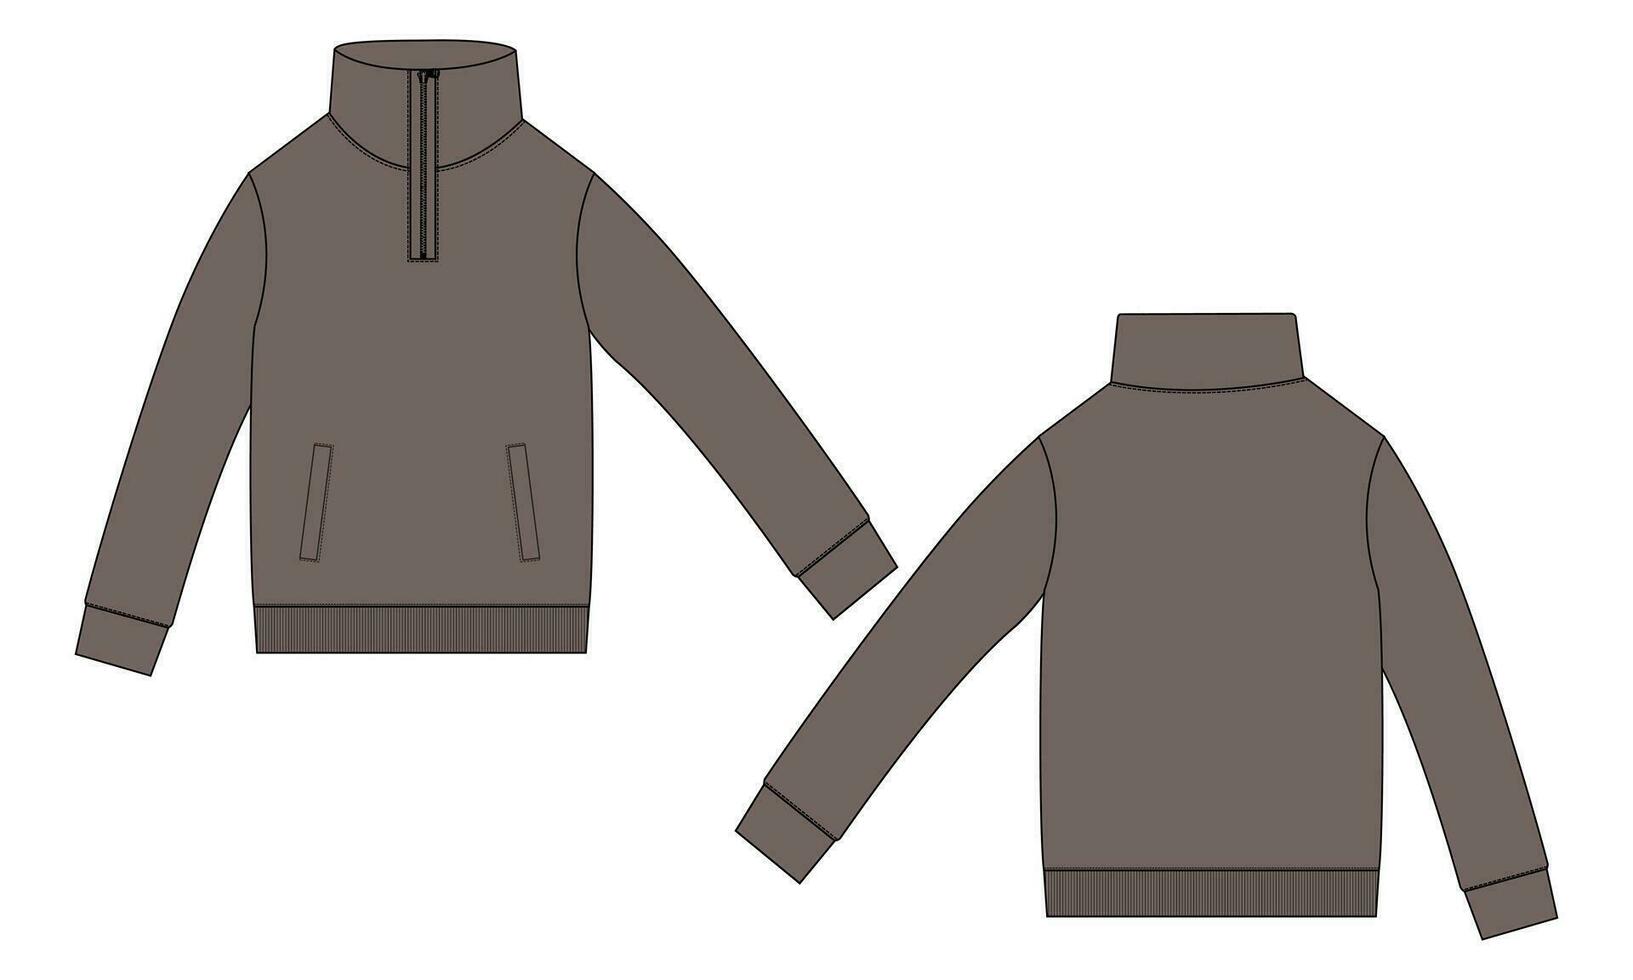 Long sleeve jacket with pocket and zipper technical fashion flat sketch vector illustration template front and back views. Fleece jersey sweatshirt jacket for men's and boys.